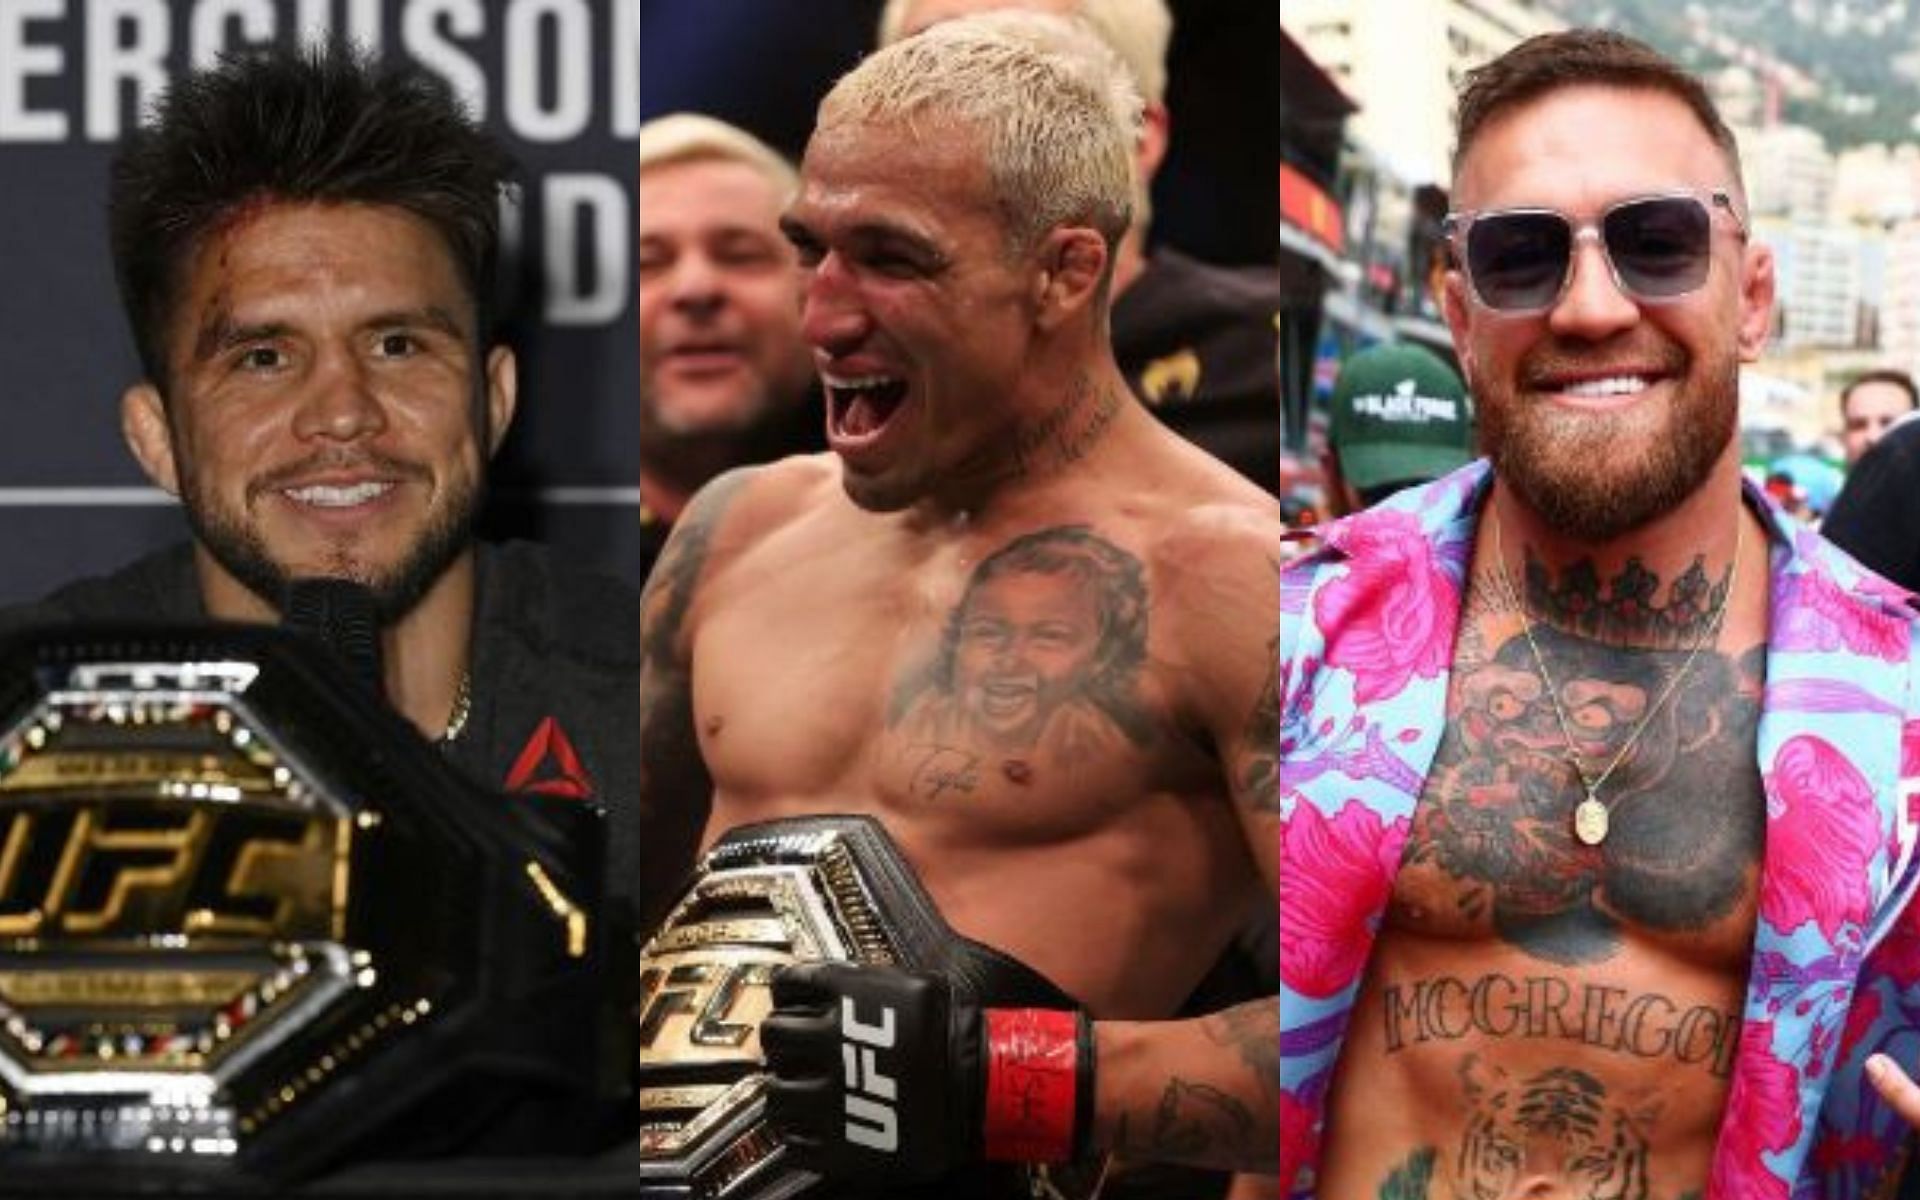 From left to right: Henry Cejudo, Charles Oliveira, and Conor McGregor [ Image credits: Getty Images ]